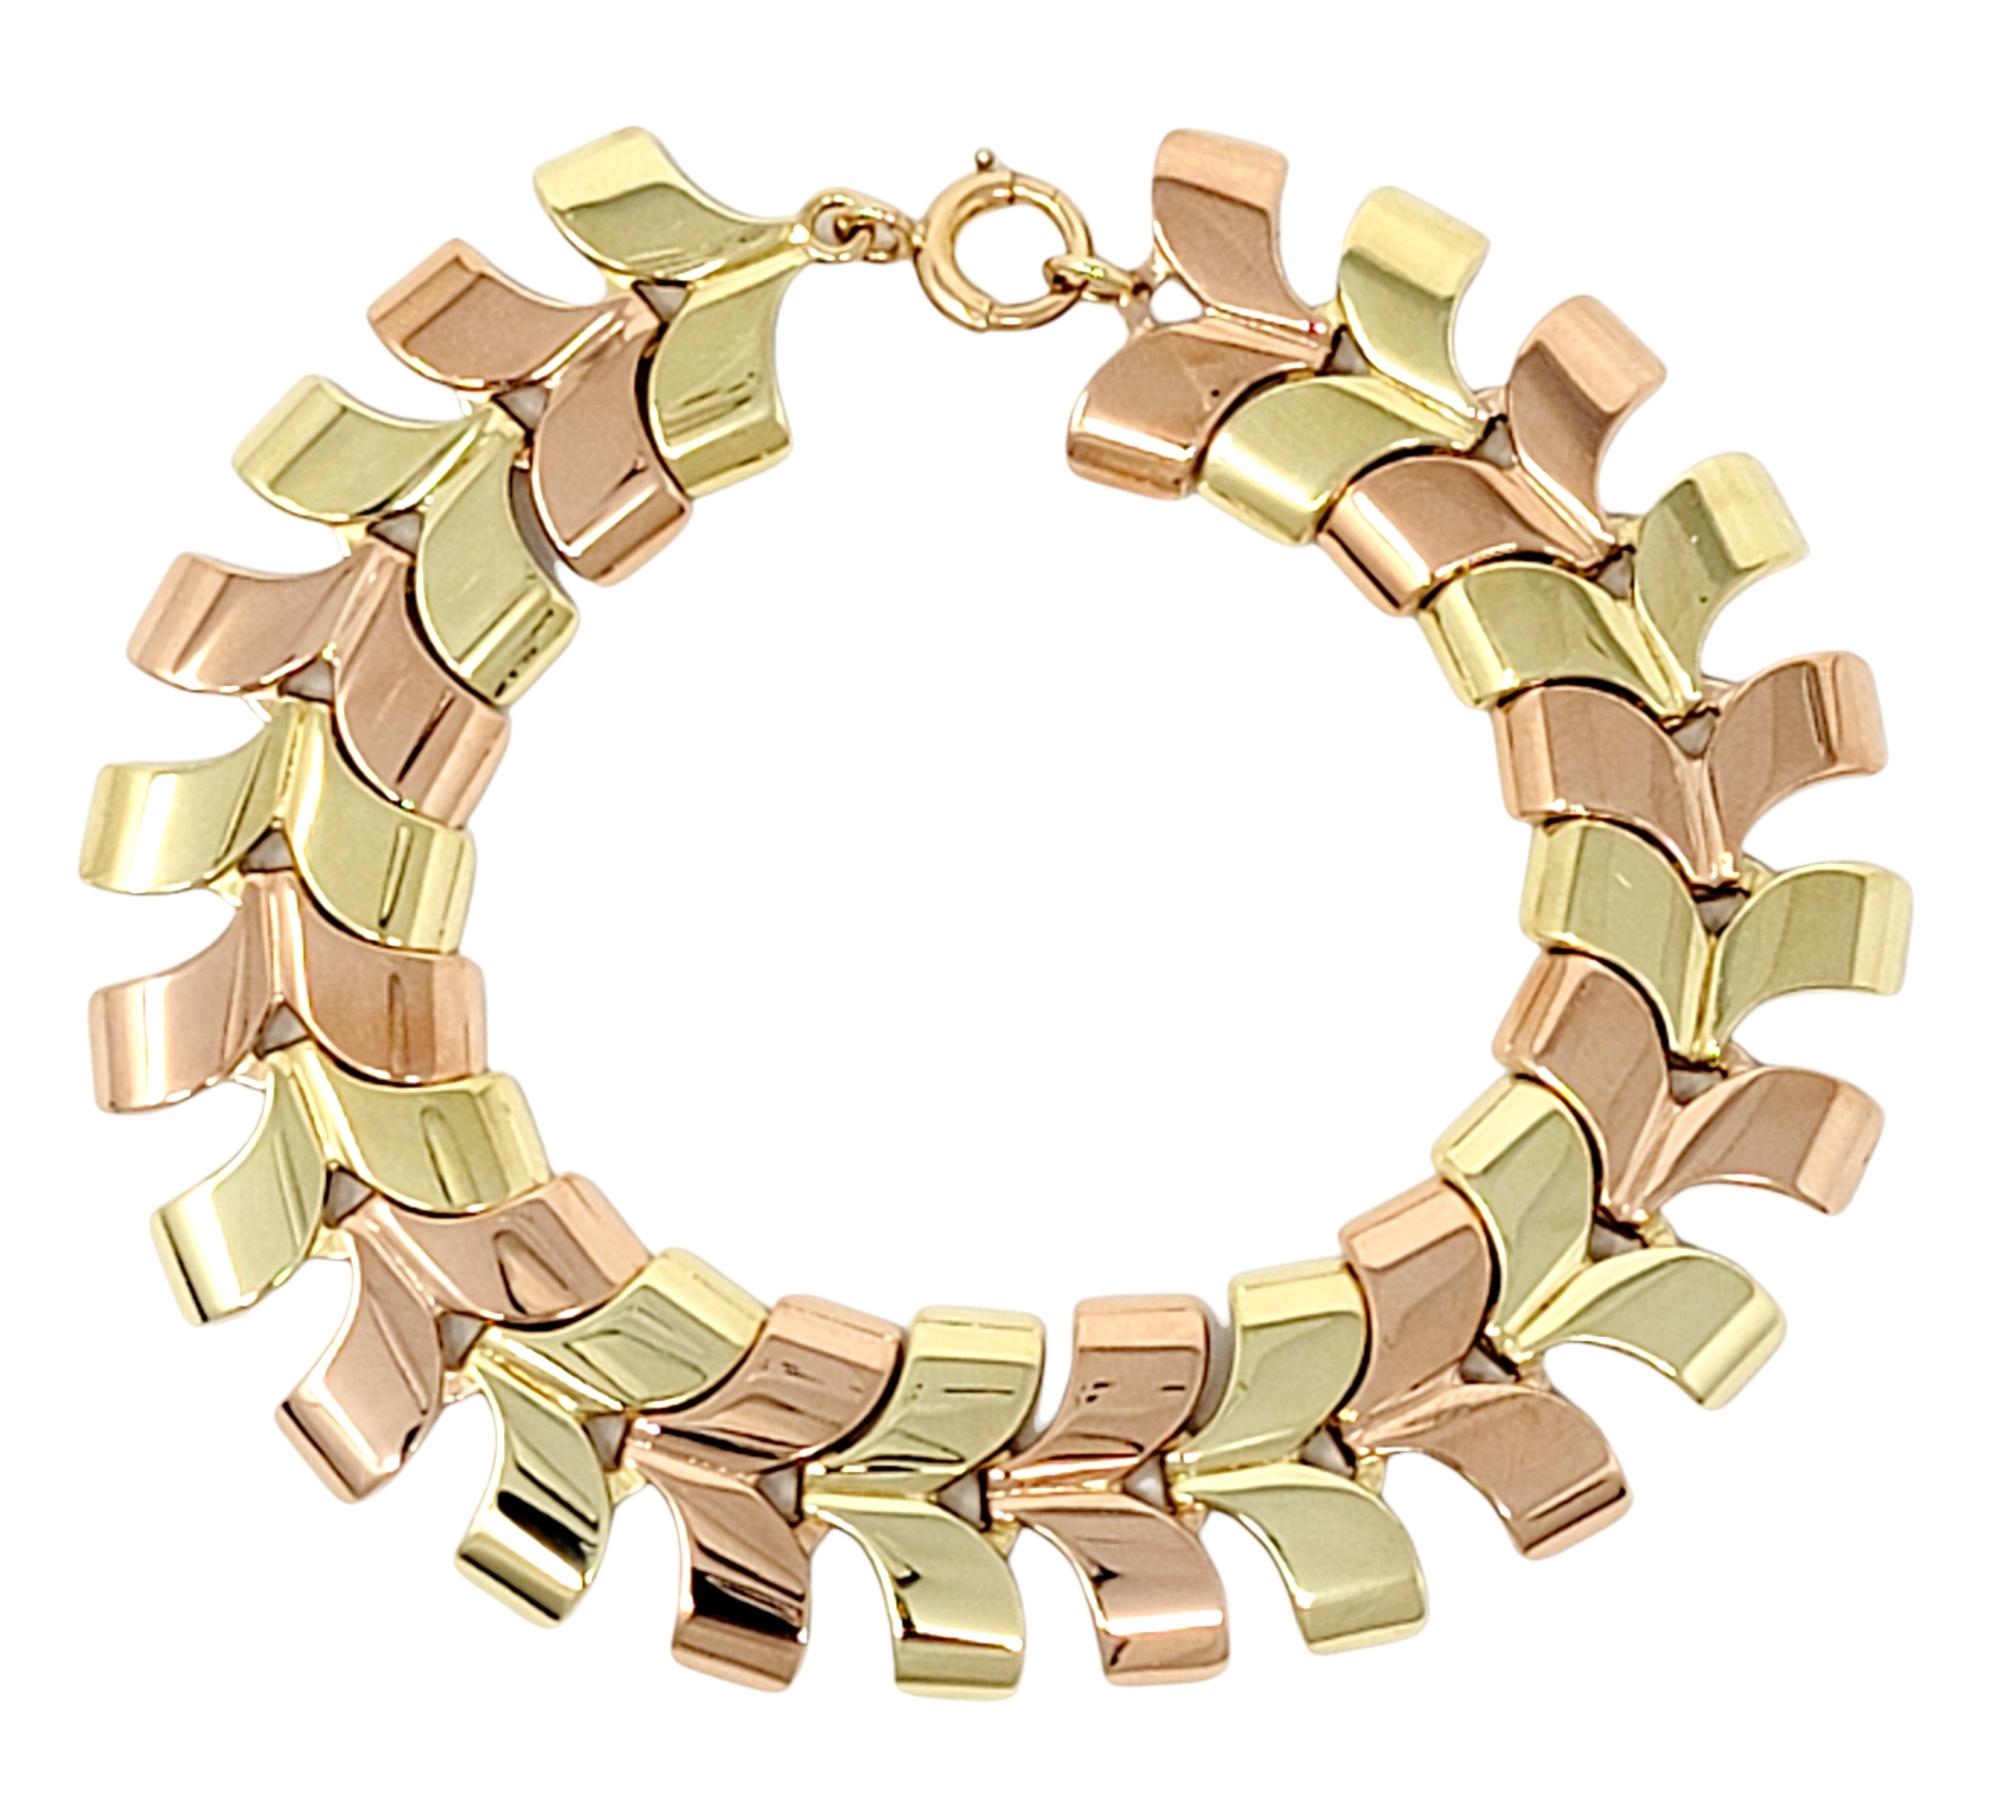 Modern and sleek two-toned 14 karat yellow and rose gold curved chevron style link bracelet.

Bracelet Style: Link
Metal: 14 Karat Rose and Yellow Gold
Weight: 41.5 grams
Length: 7.5